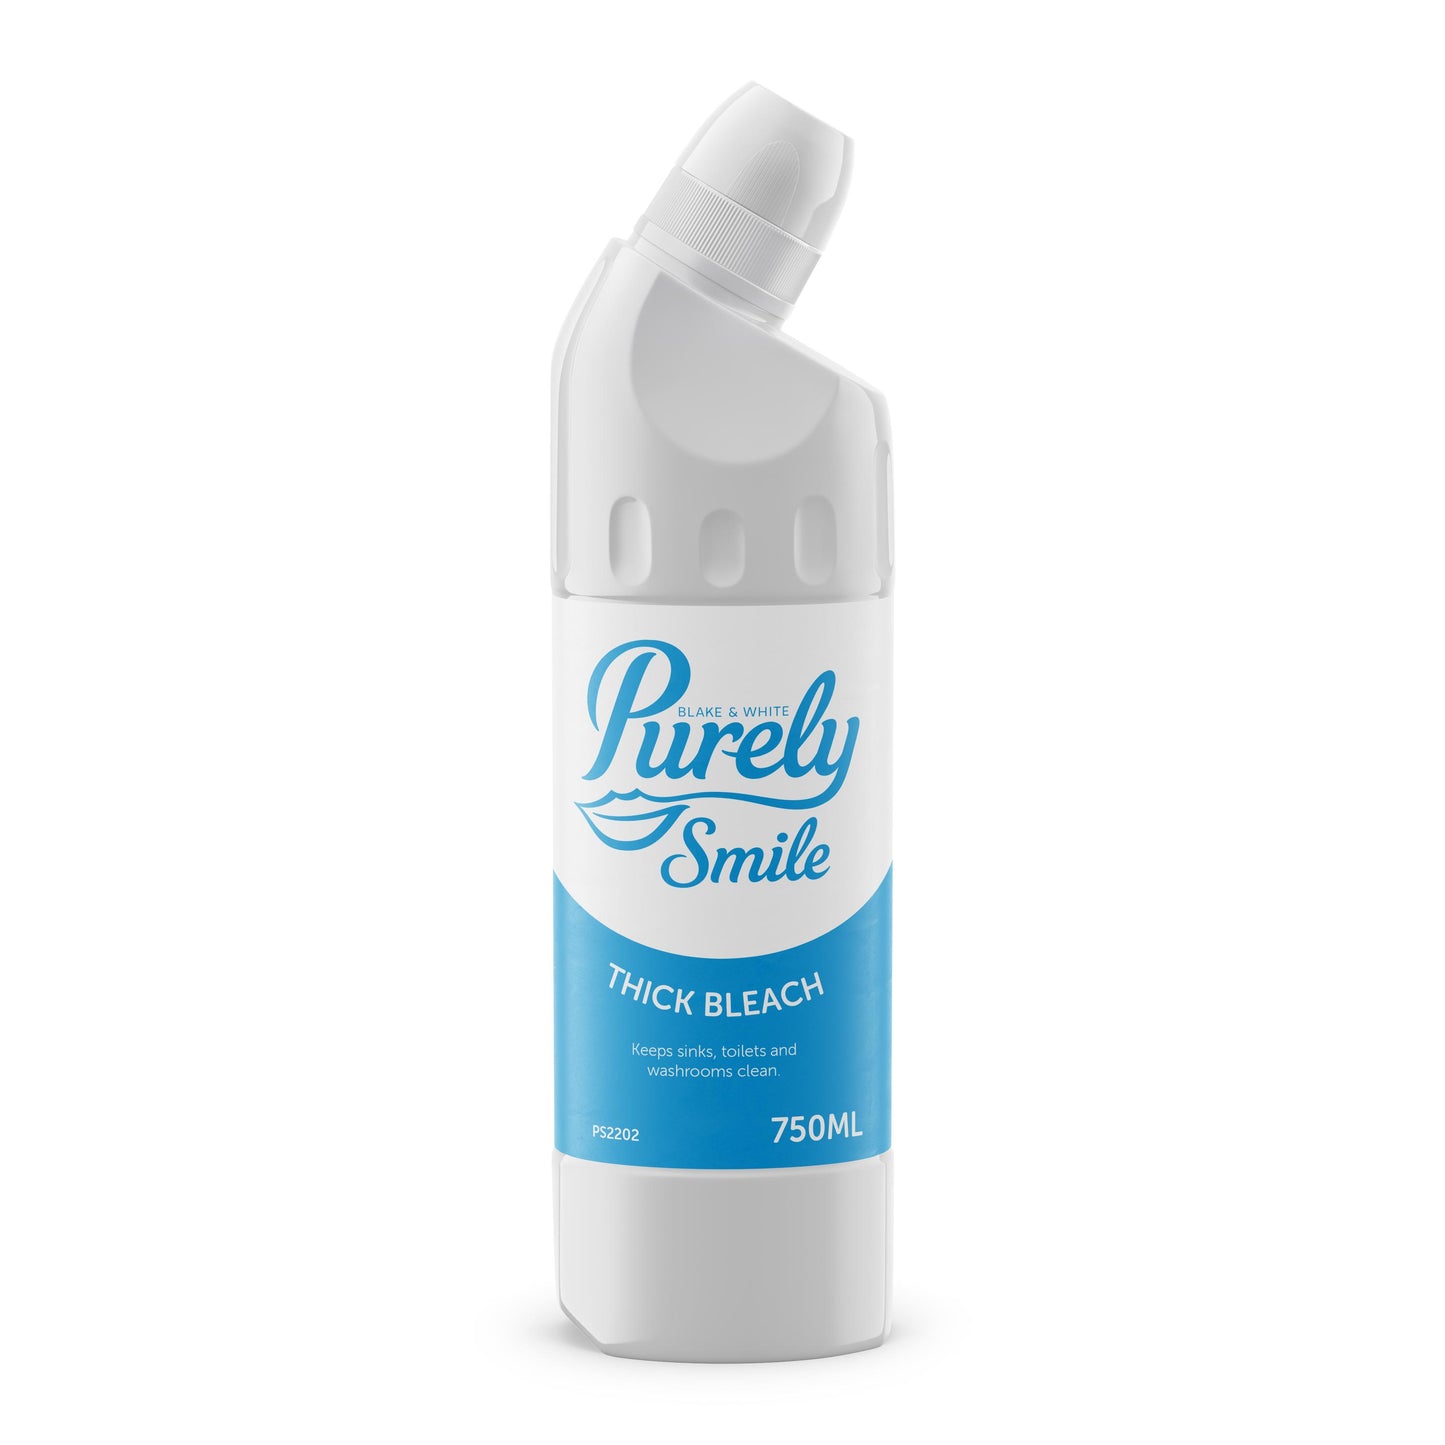 Purely Smile Thick Bleach 1L